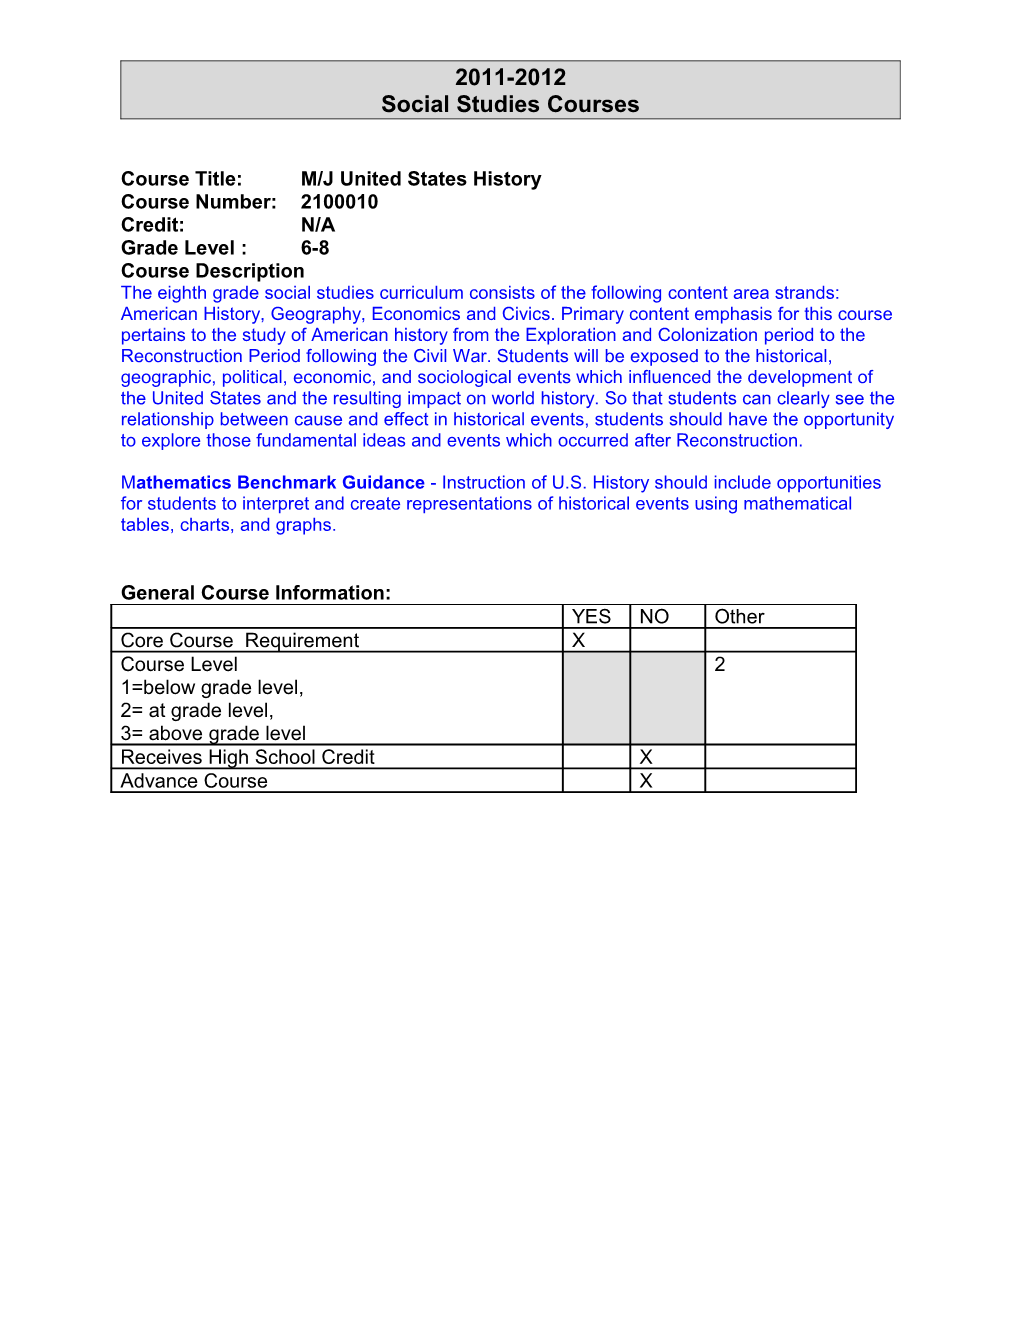 Course Title: M/J United States History